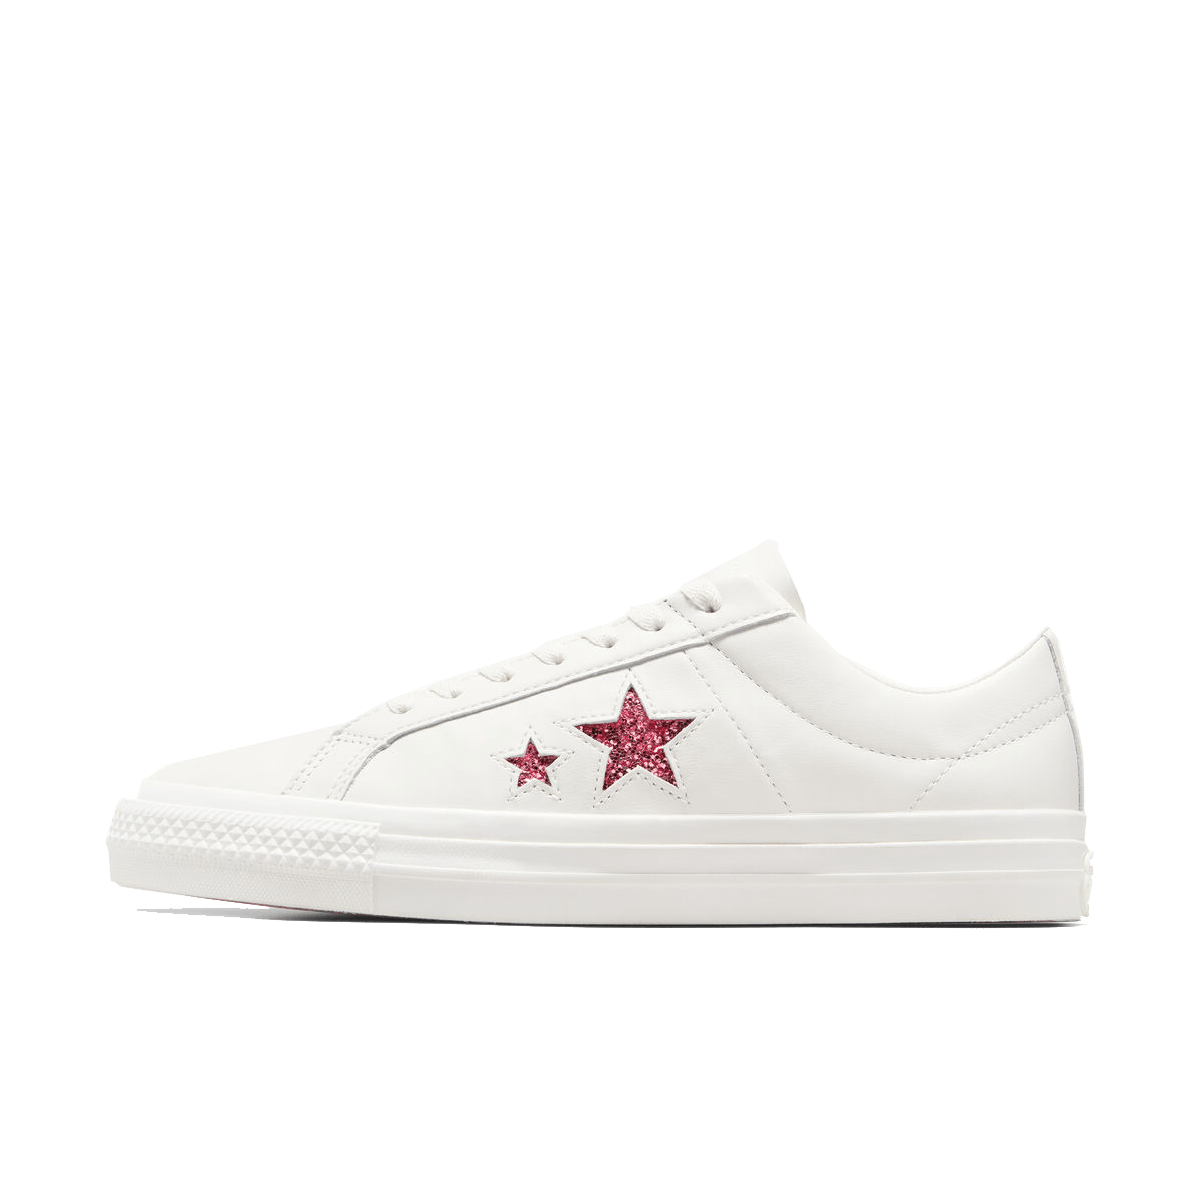 Turnstile x Converse One Star Pro 'Only One Star' A08655C